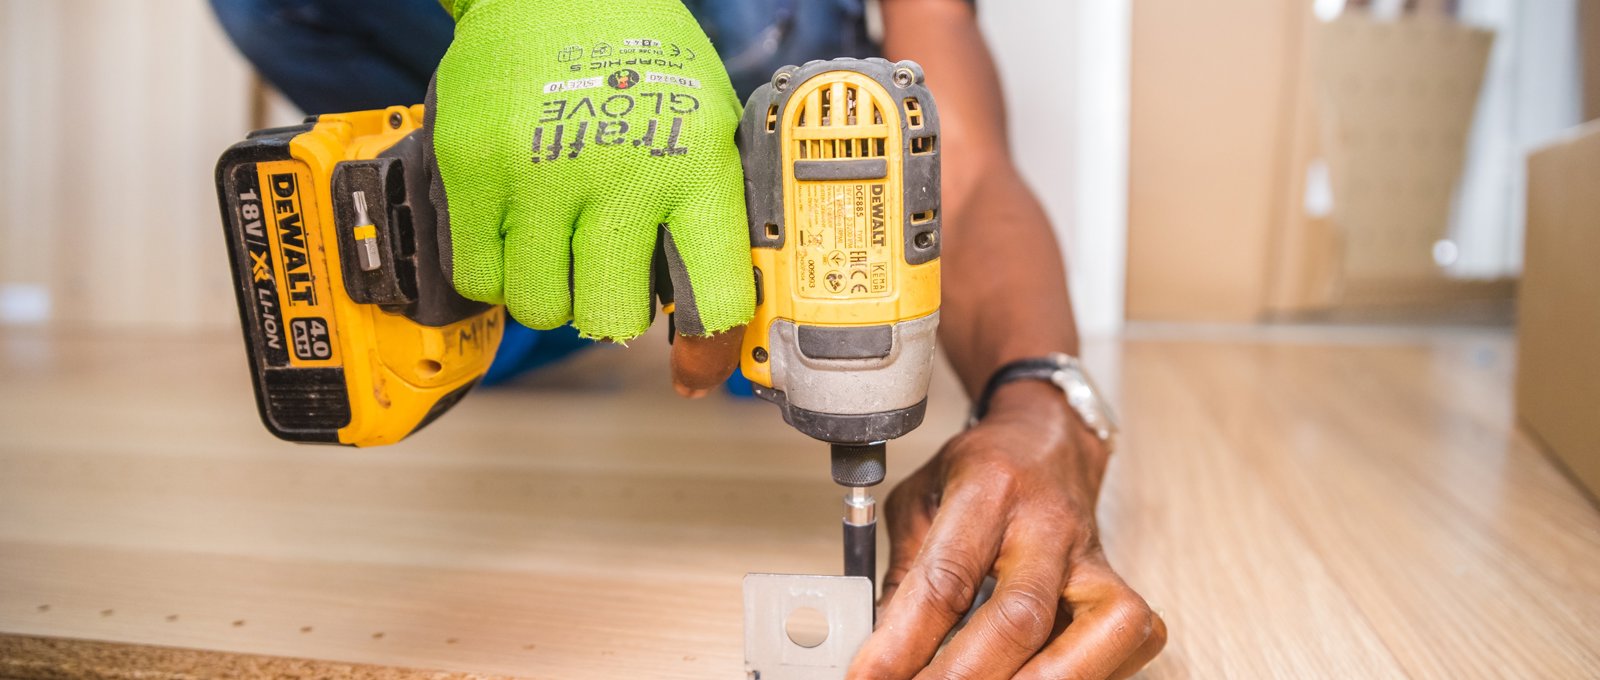 A close up on a person's hands using an electric screwdriver, attaching a metal bracket to a piece of wood.